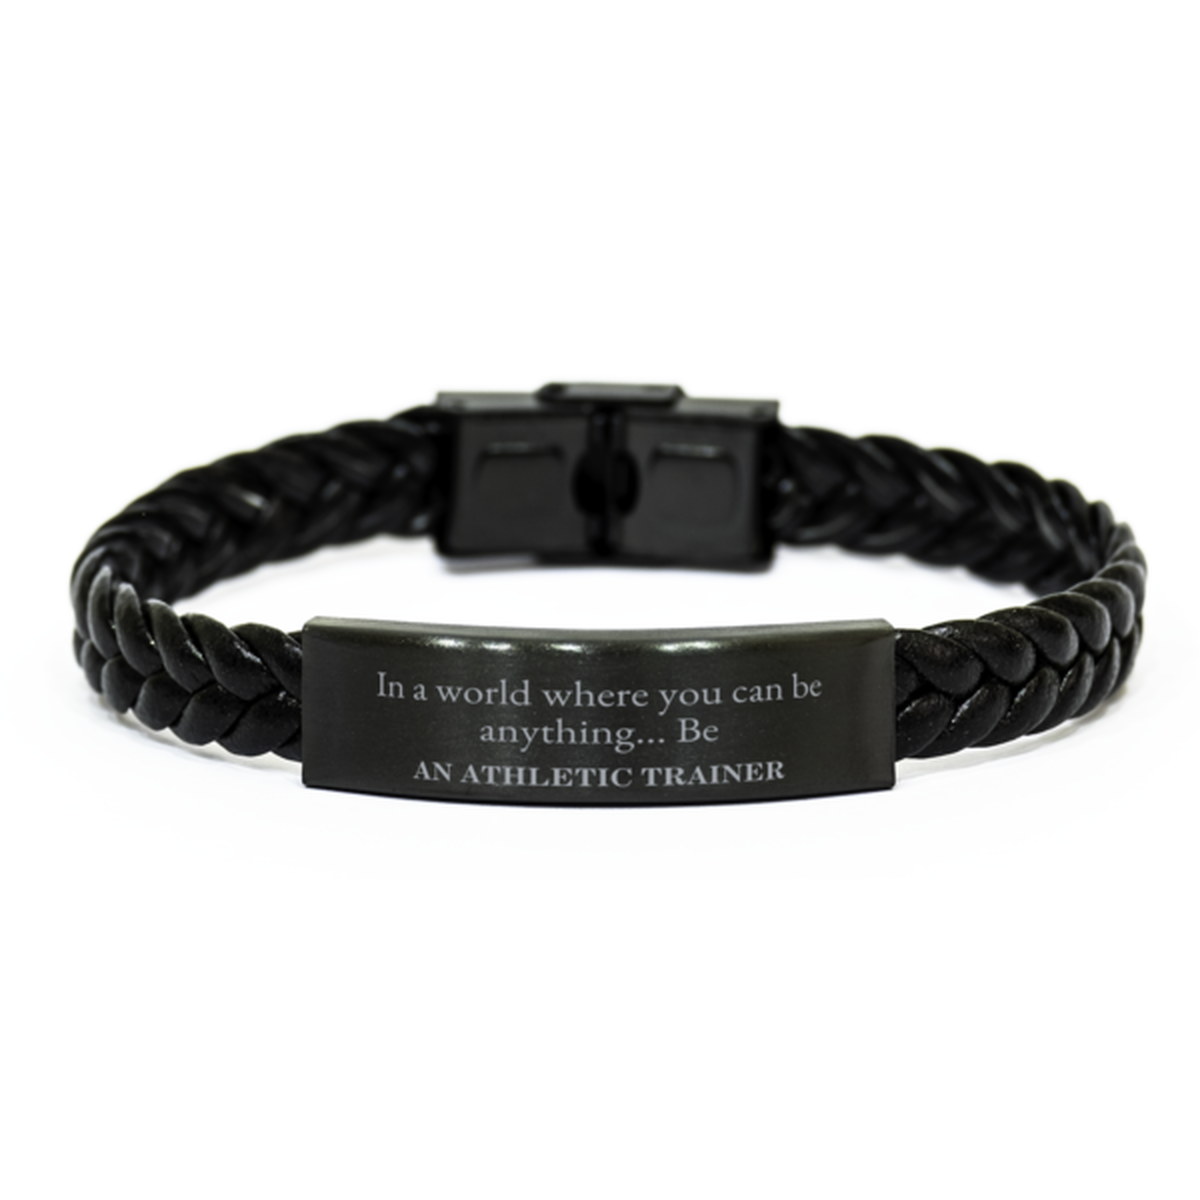 Gifts for Athletic Trainer, In a world where you can be anything, Appreciation Birthday Braided Leather Bracelet for Men, Women, Friends, Coworkers